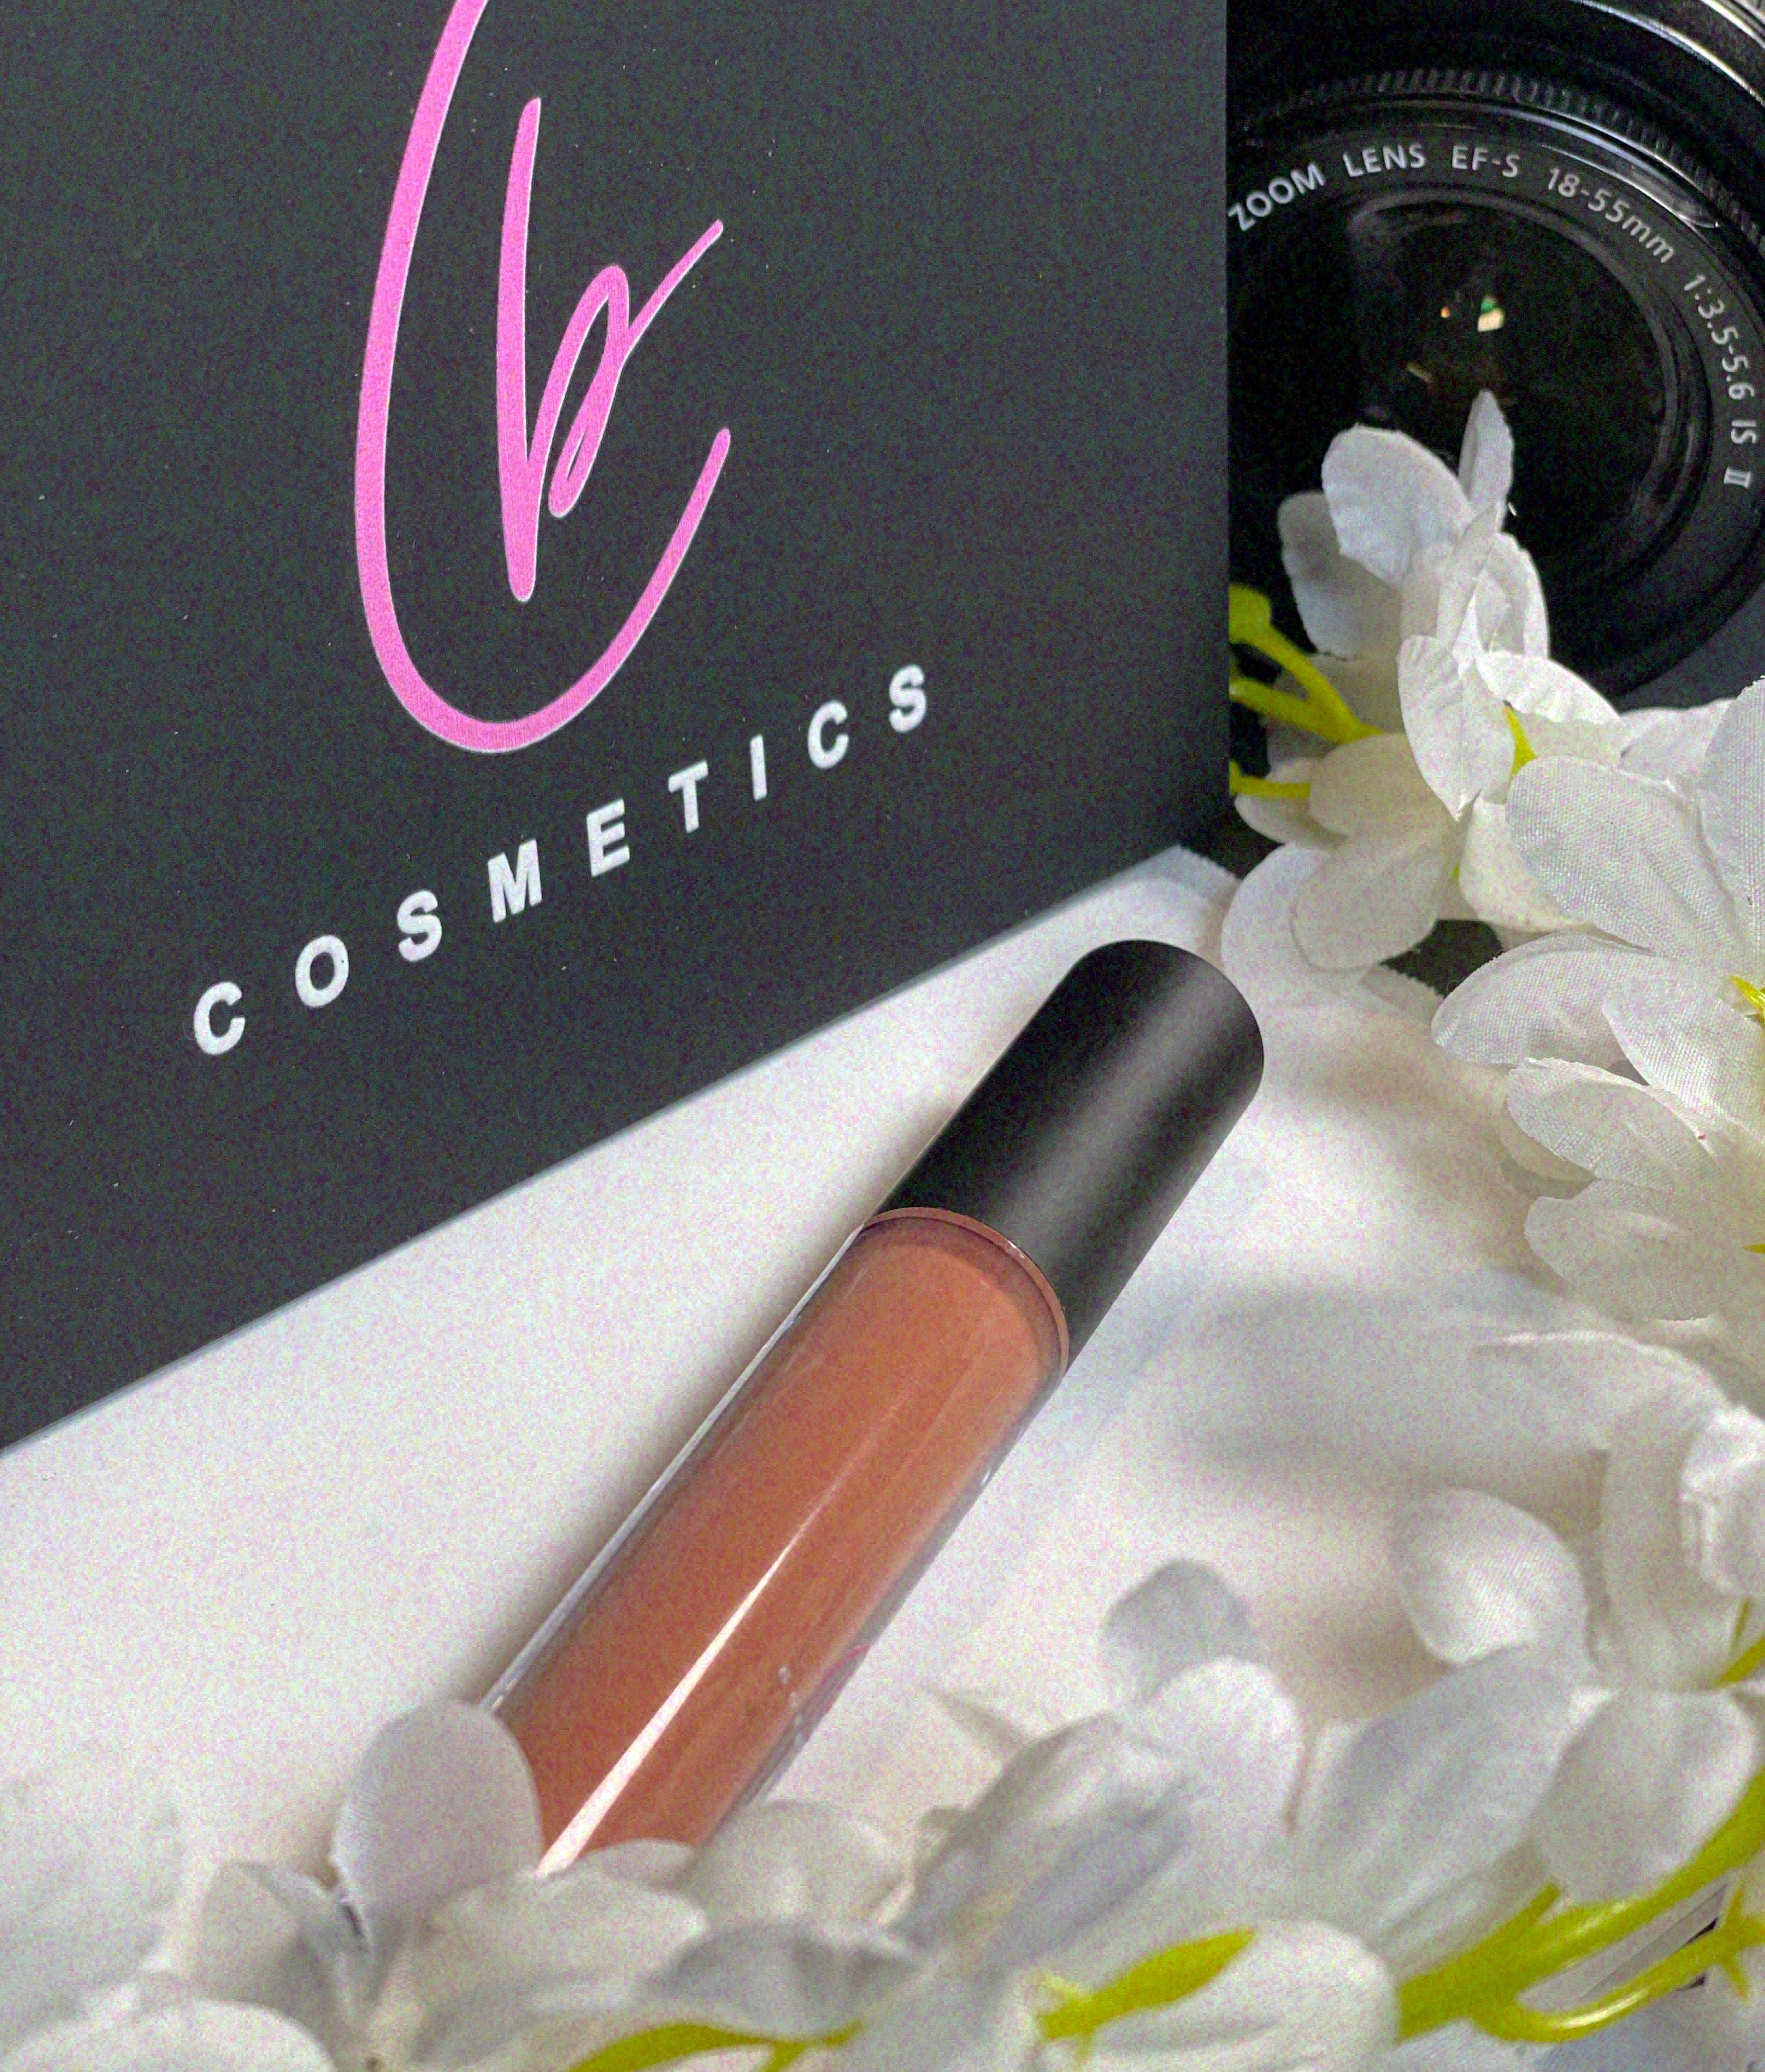 This soft nude shade is everything. If you're looking to add sexy to your look, then look no further. This color stay liquid matte lipstick is a great add on to your nude collection. 1 layer gives full coverage and 2-3 layers gives the full nude painted experience.